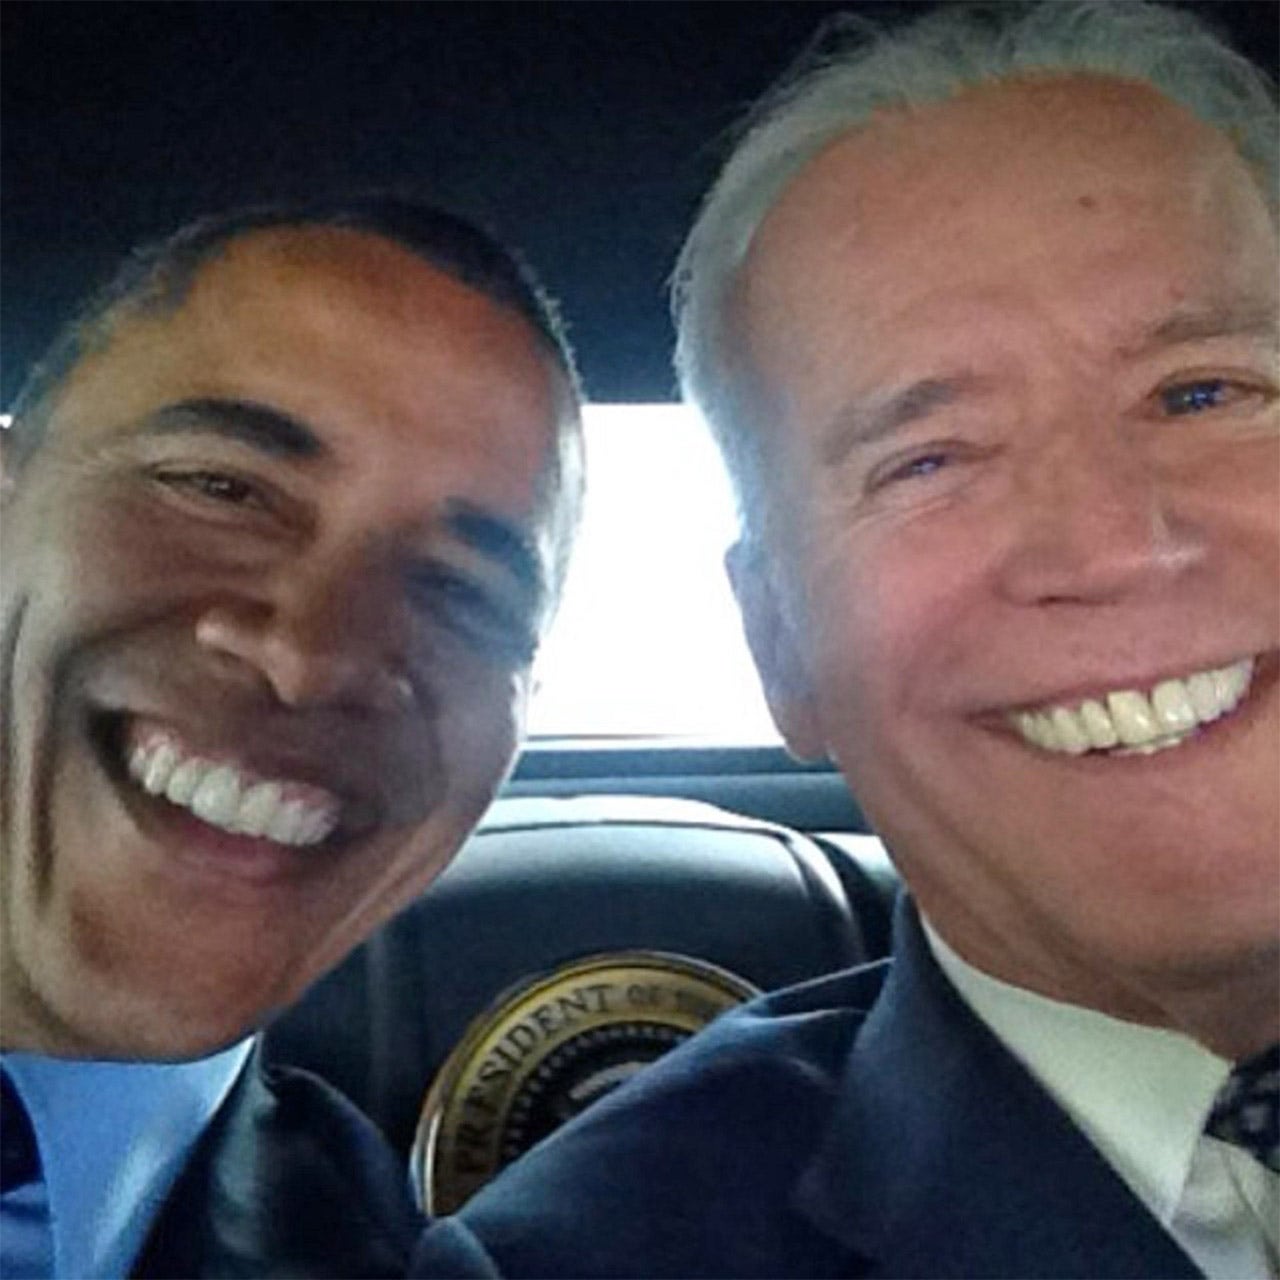 Durham reports shows Biden and Obama knew truth of Trump collusion hoax but kept silent